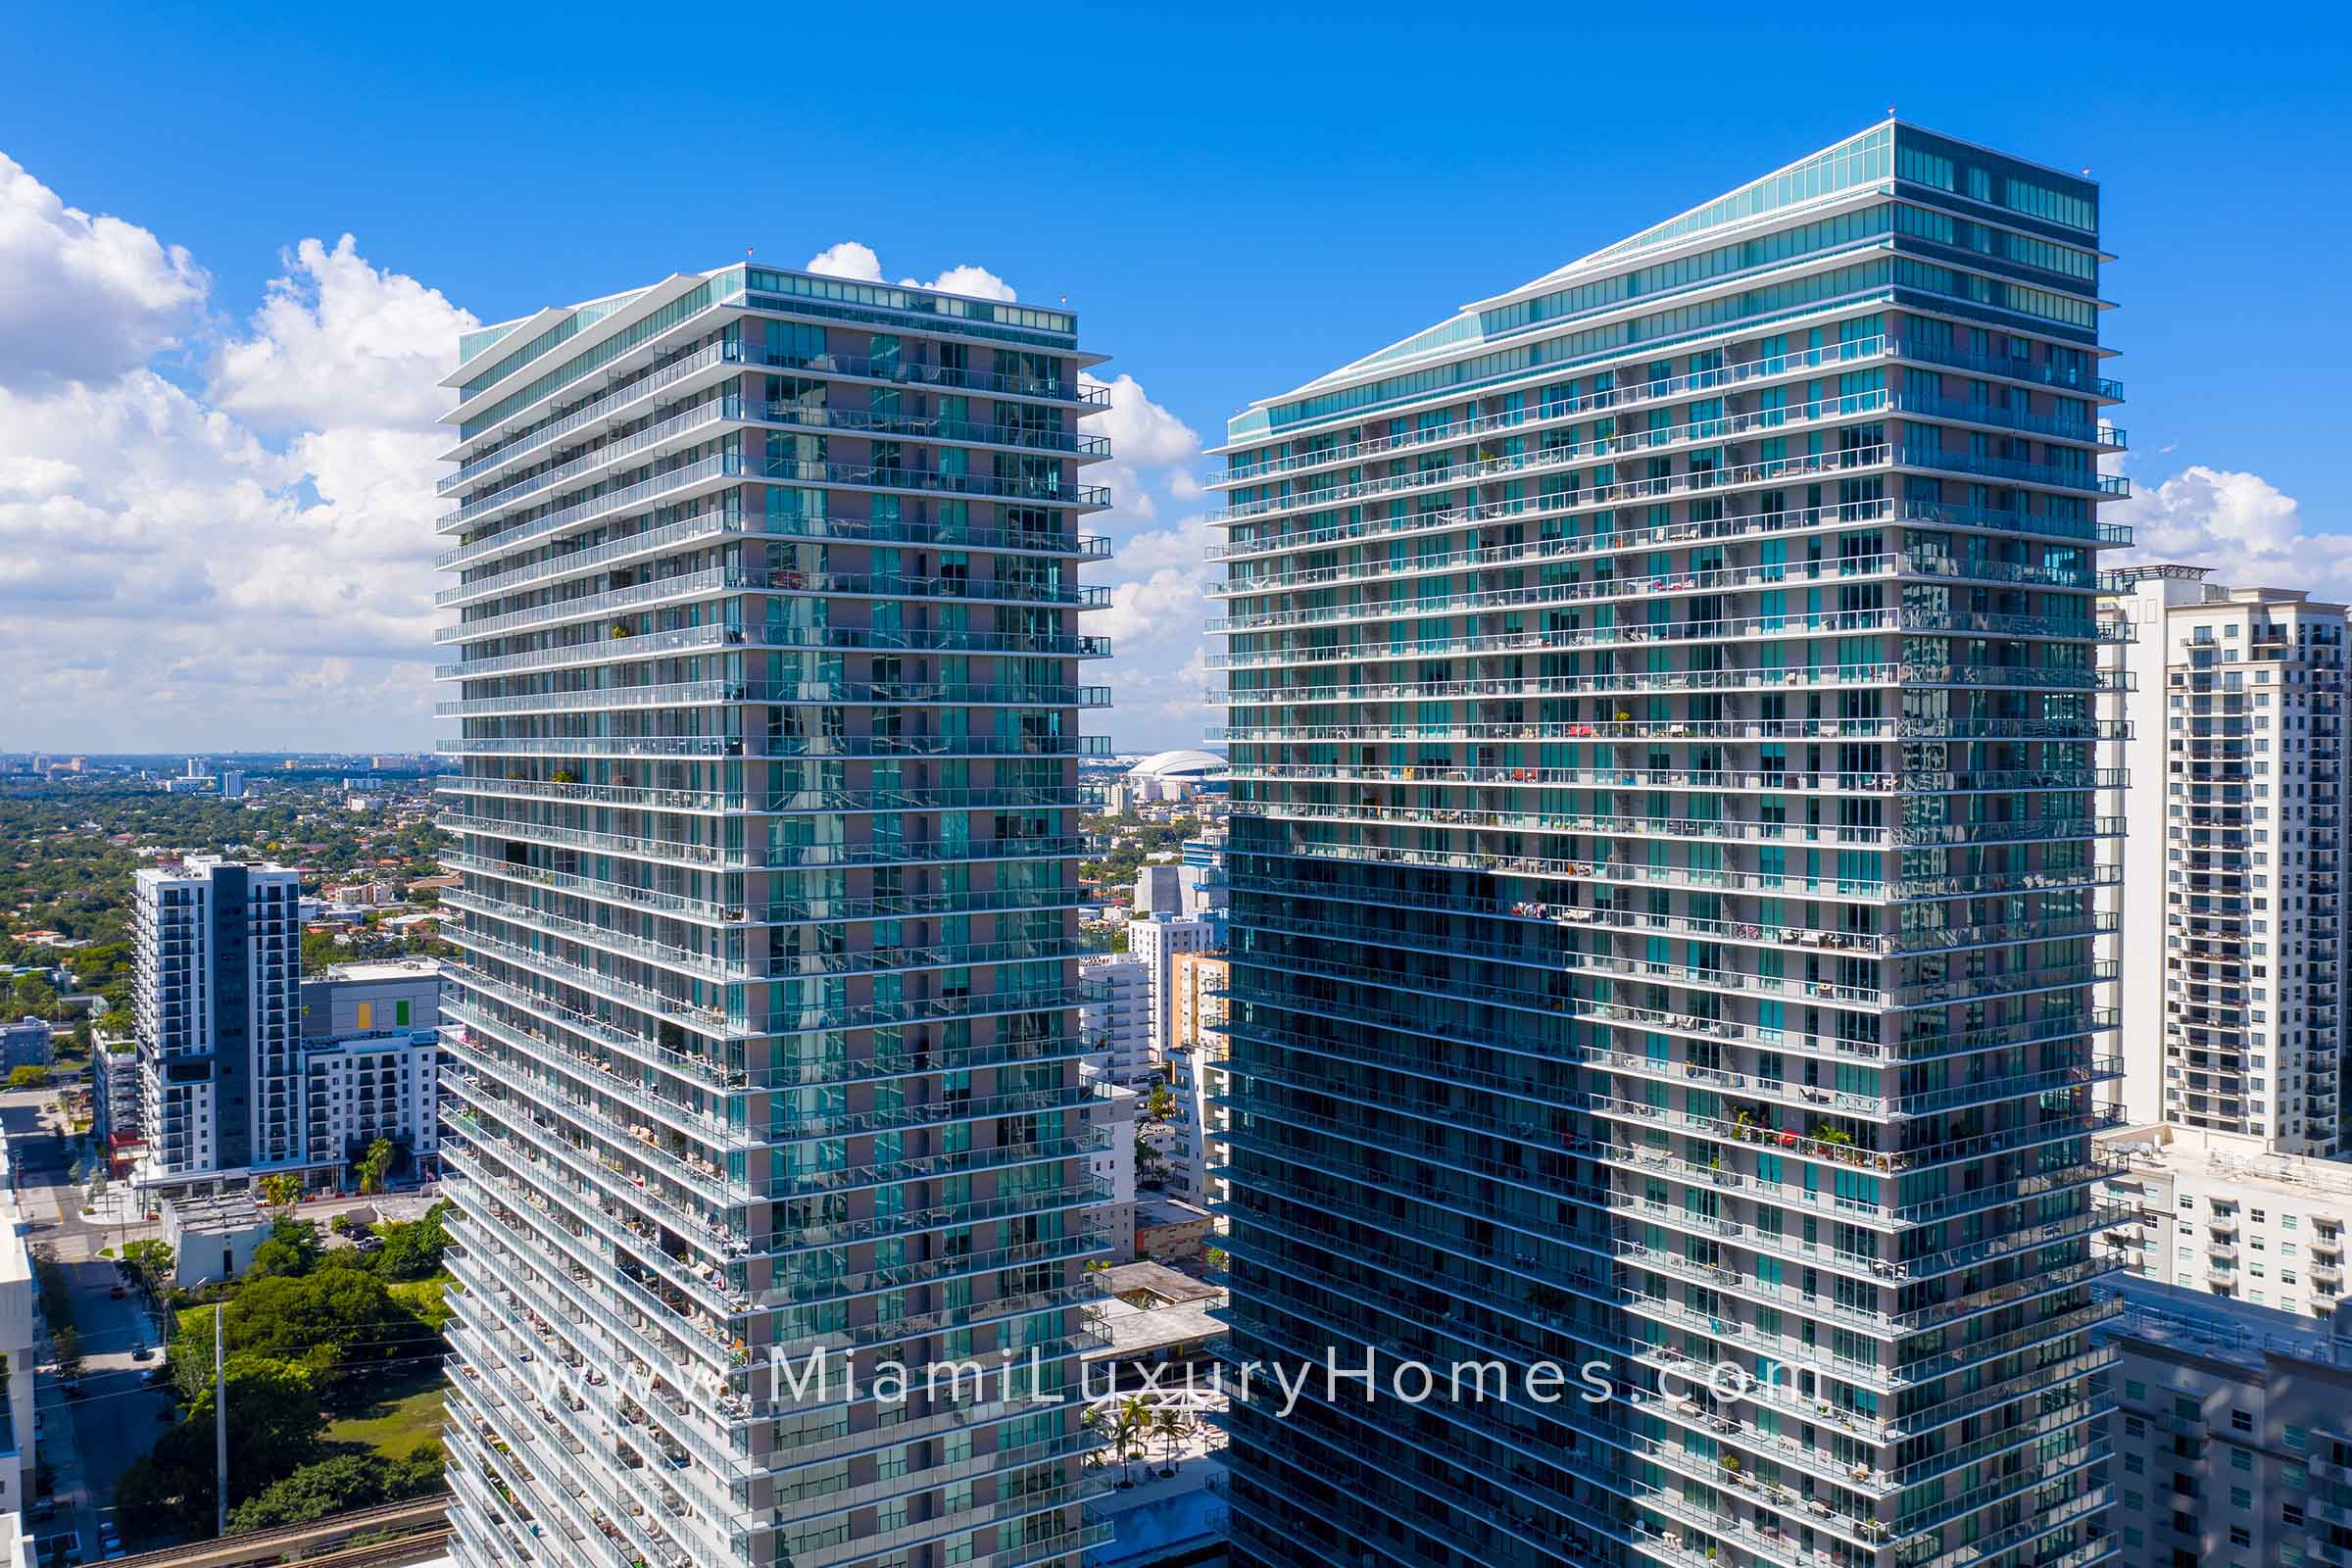 Axis on Brickell Condos in Downtown Miami